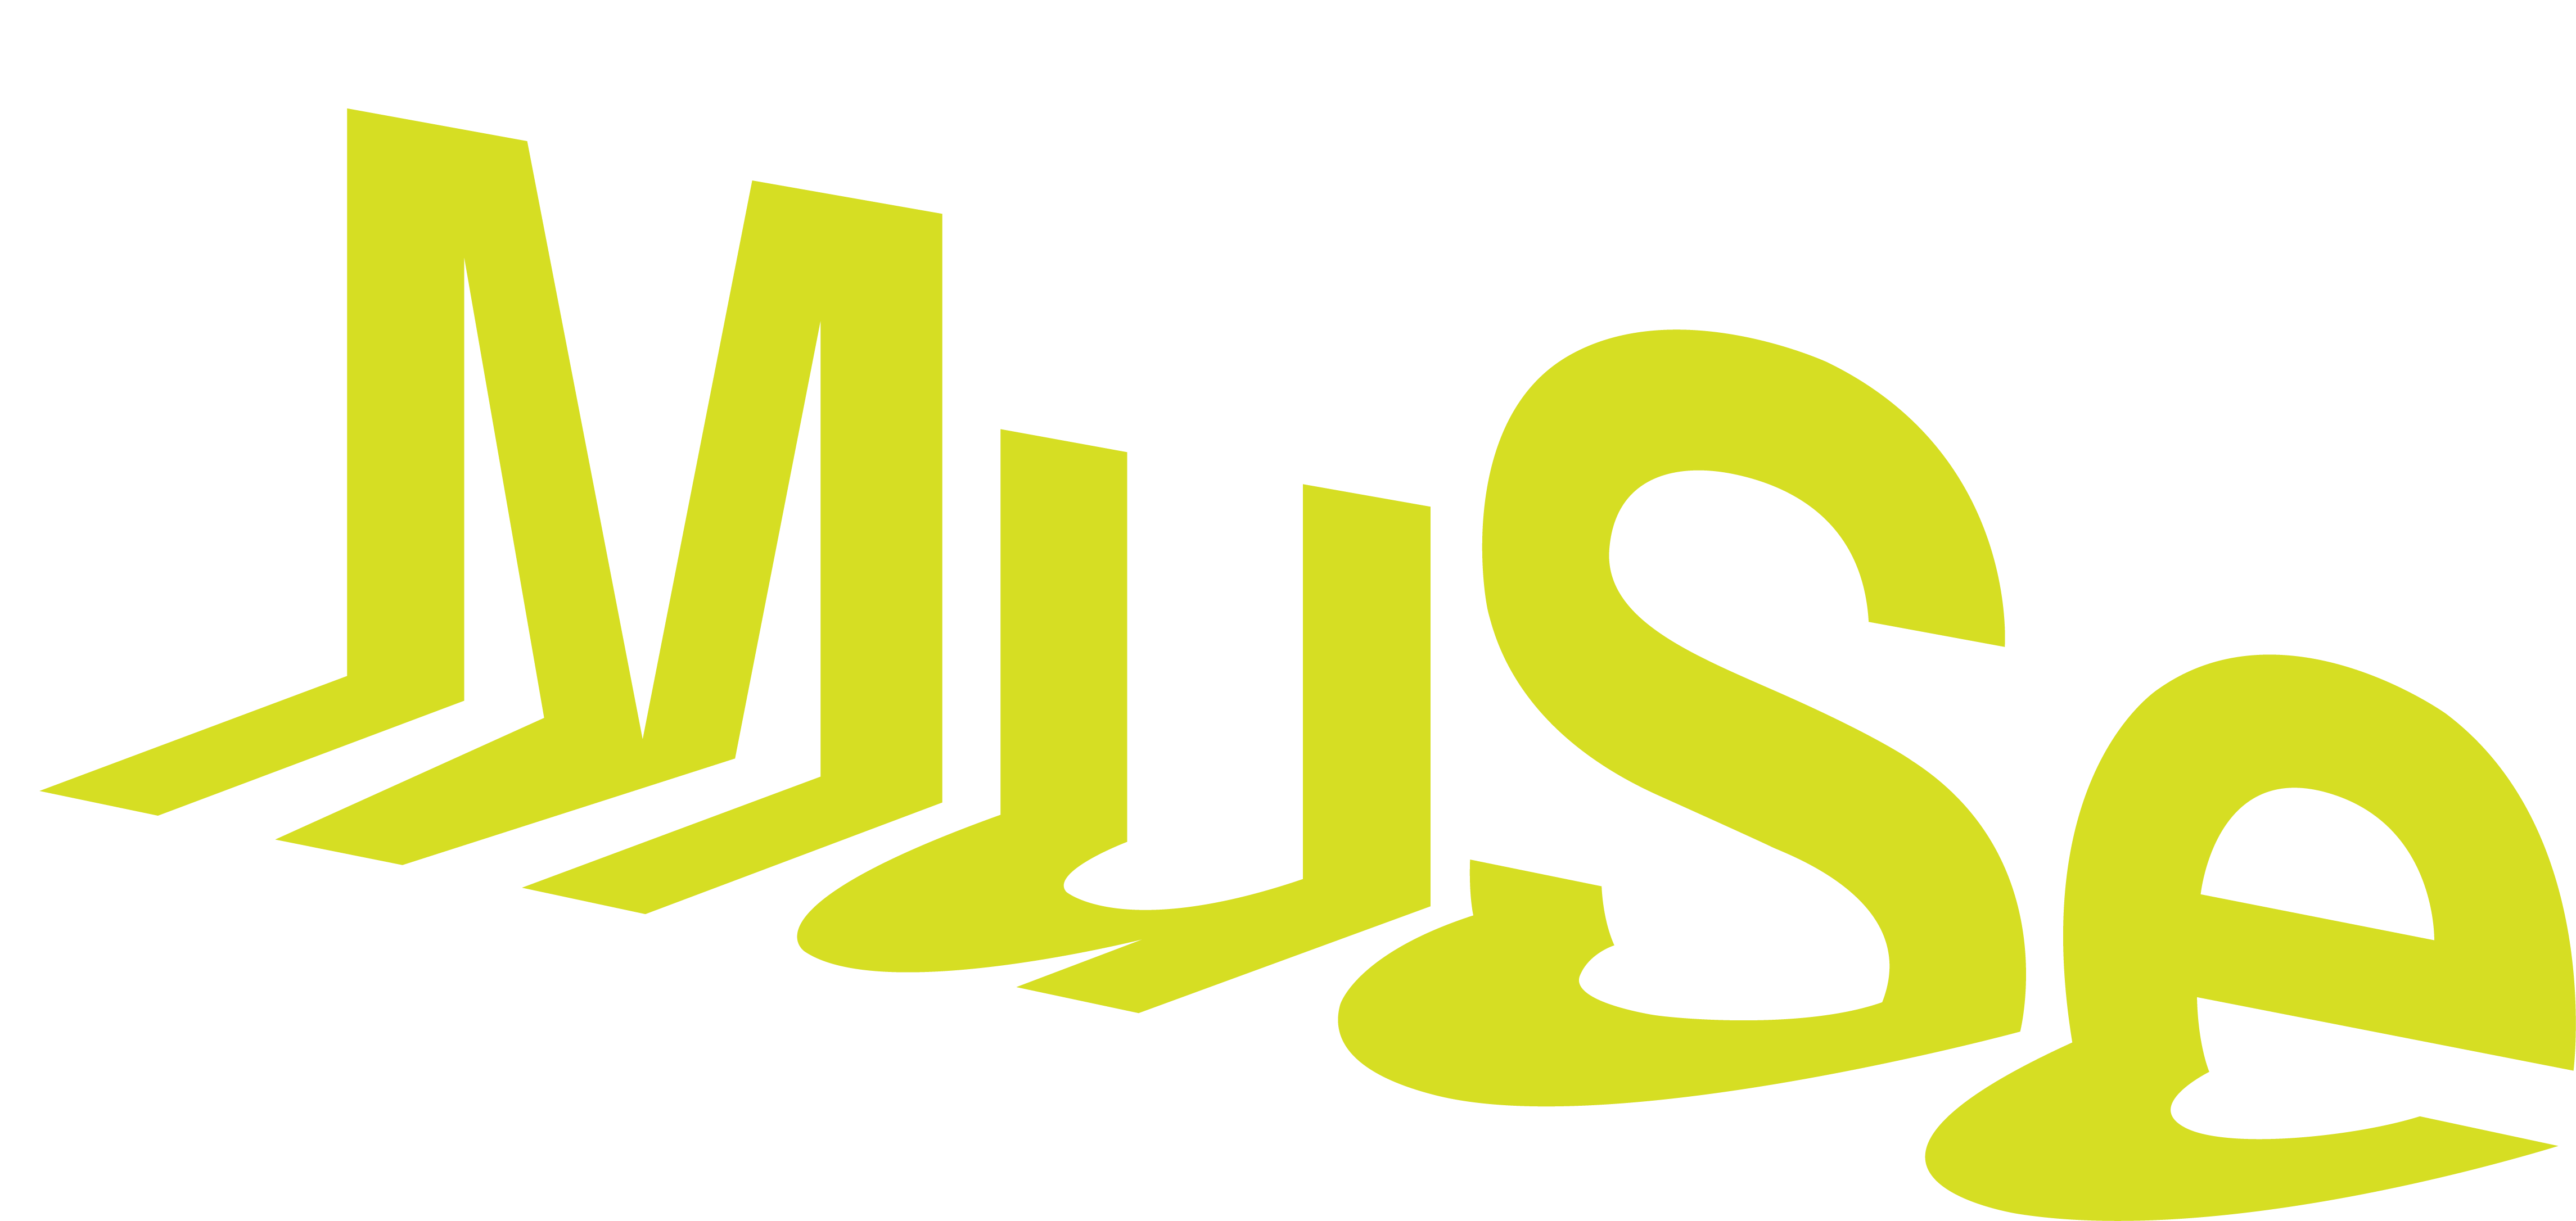 2022-02/loghi-muse-png.png